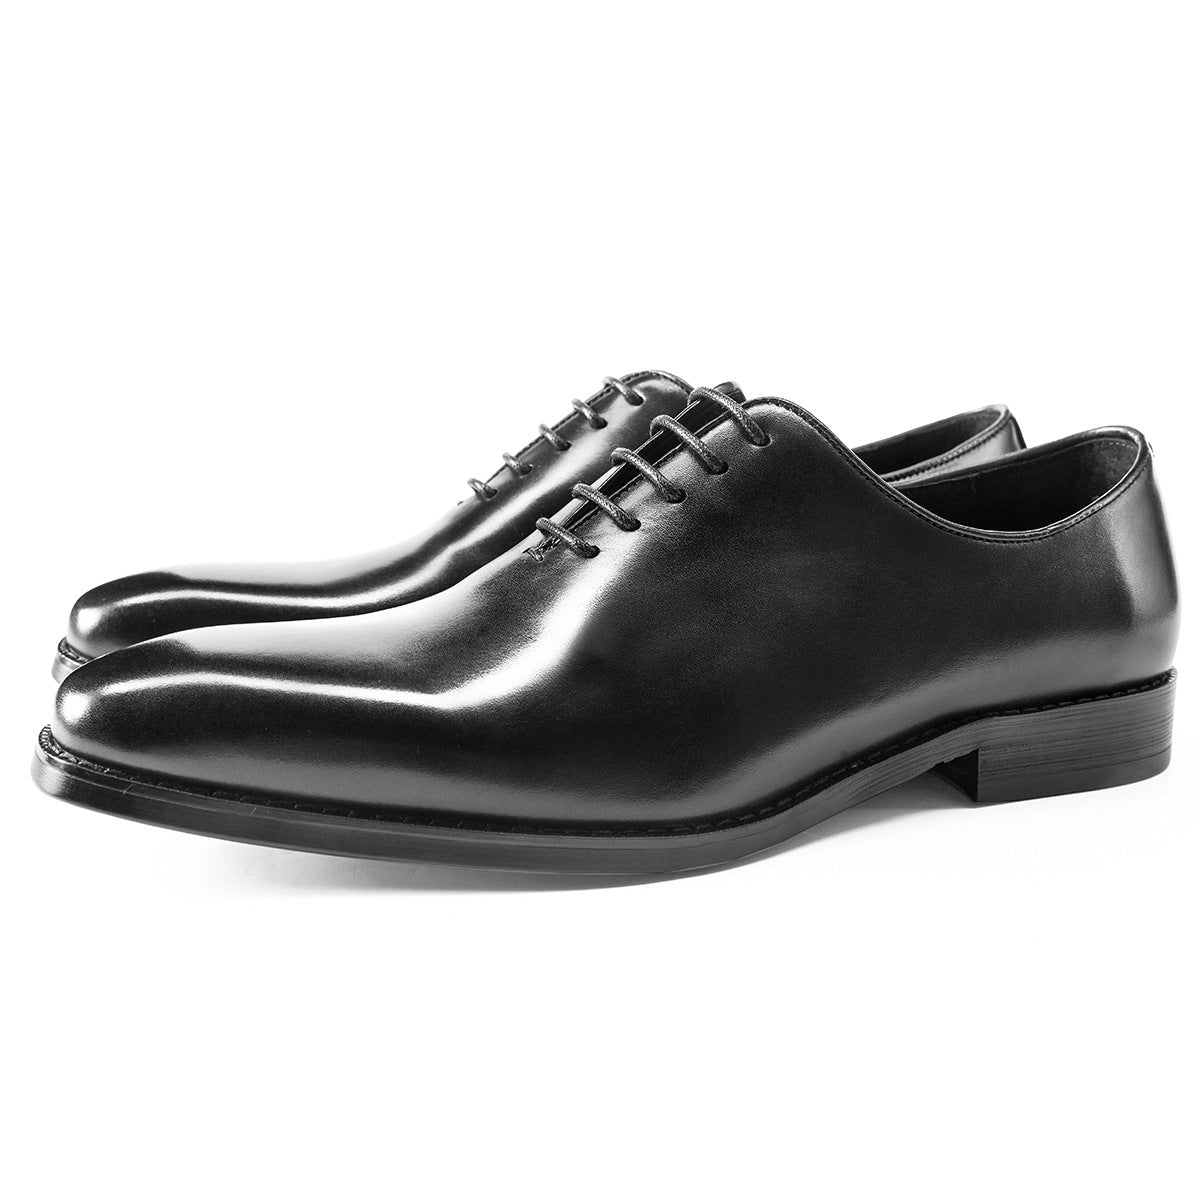 Men's One-piece Oxford Shoes-handmade Brushed Business Leather Shoes